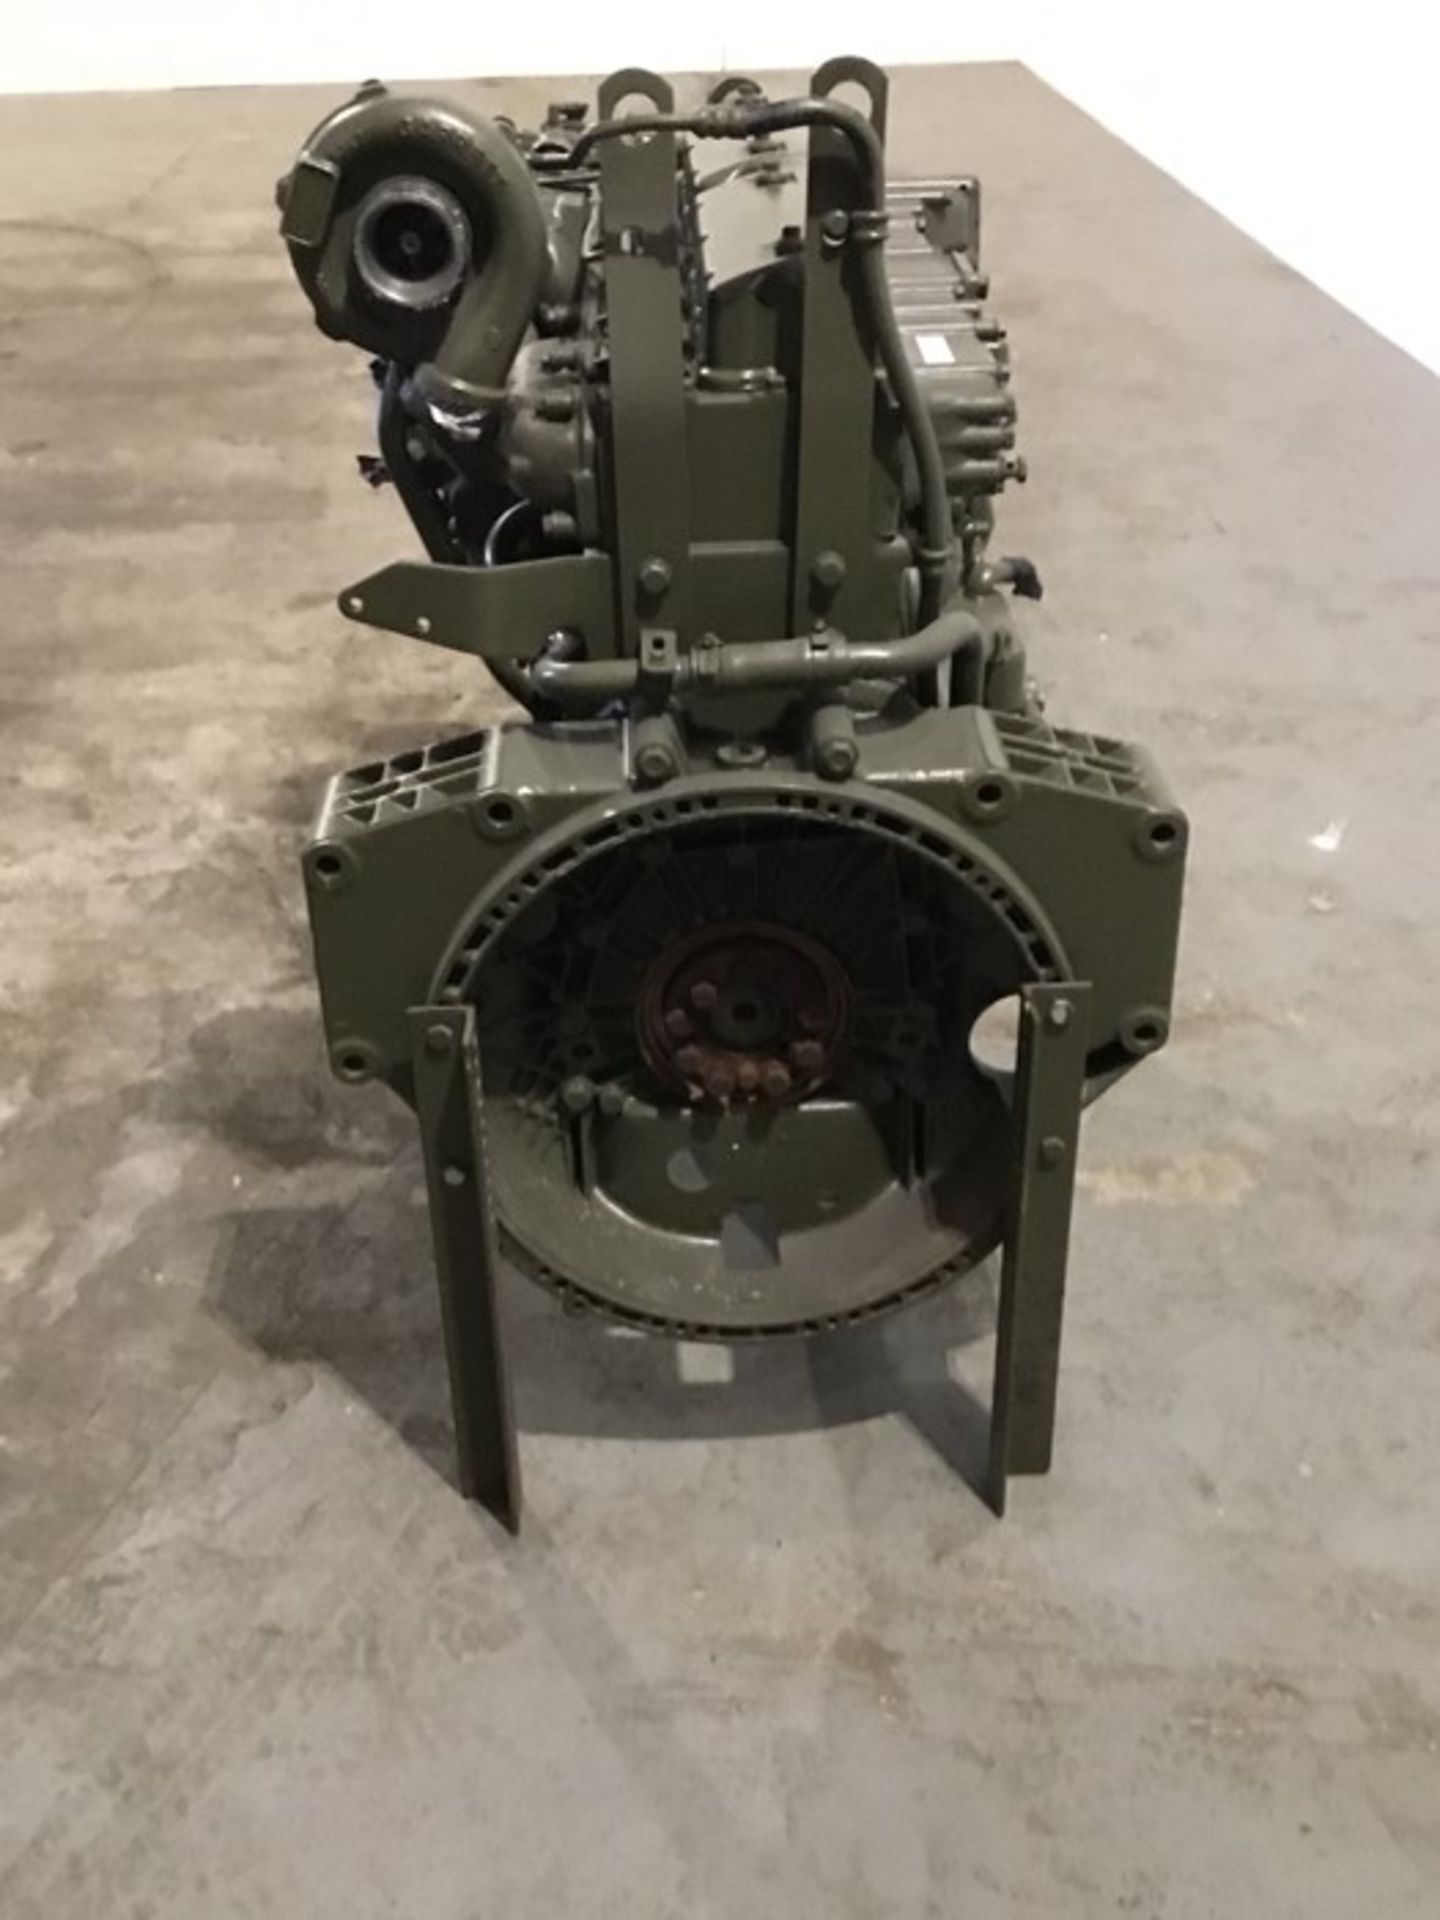 Volvo D6 Diesel Engine: Volvo D6 6Cyl Turbo low hours - Image 16 of 18